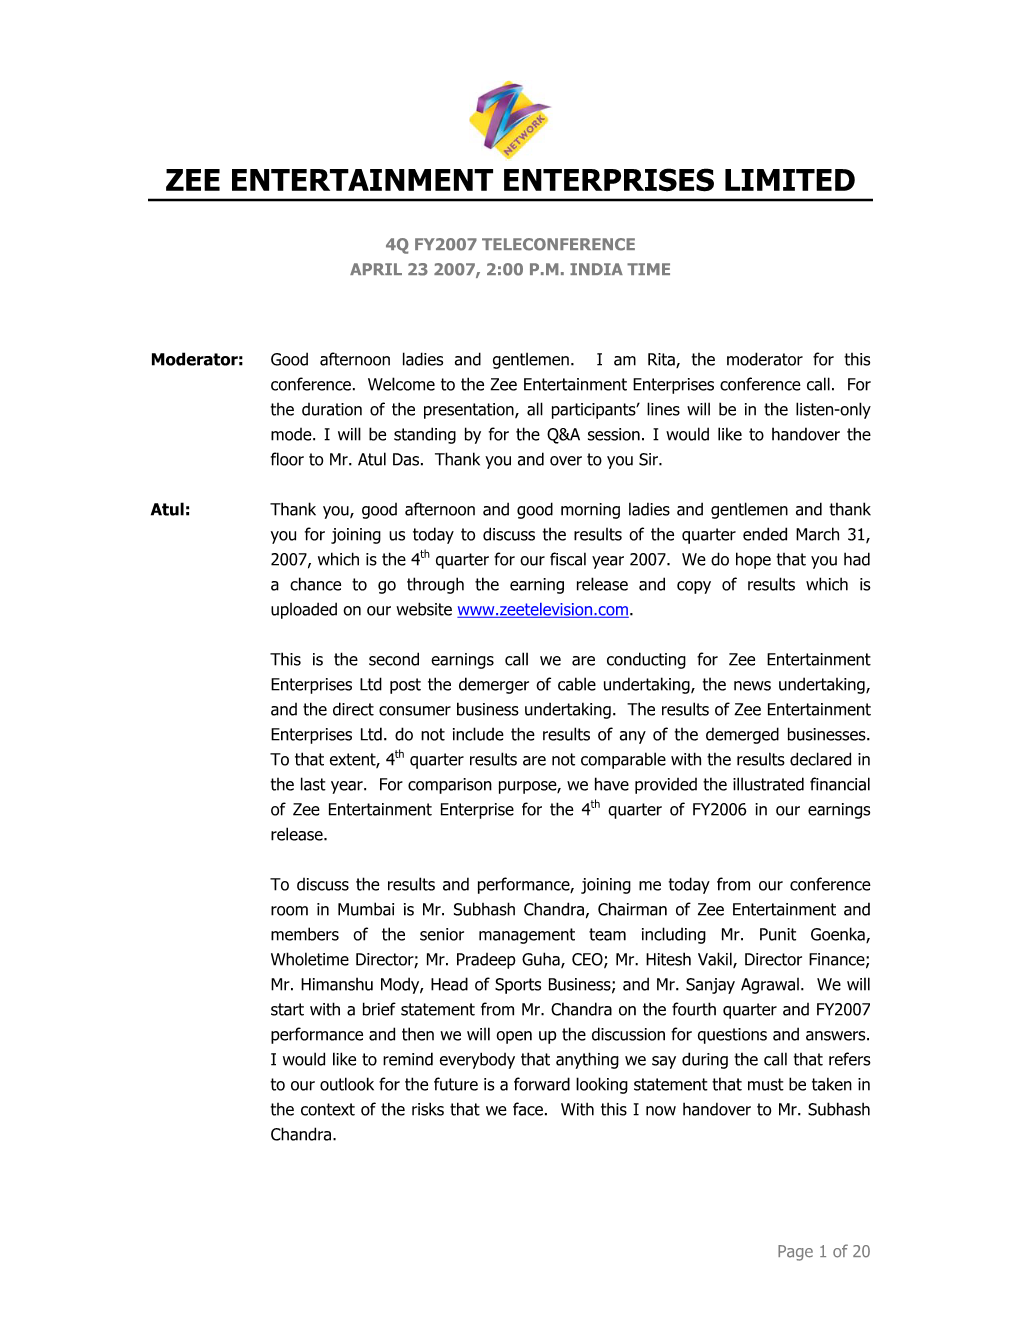 Zee TV Has Averaged About 211 Grps for the Entire Quarter and the Channel Shared a 23% Within the GEC, General Entertainment Platter